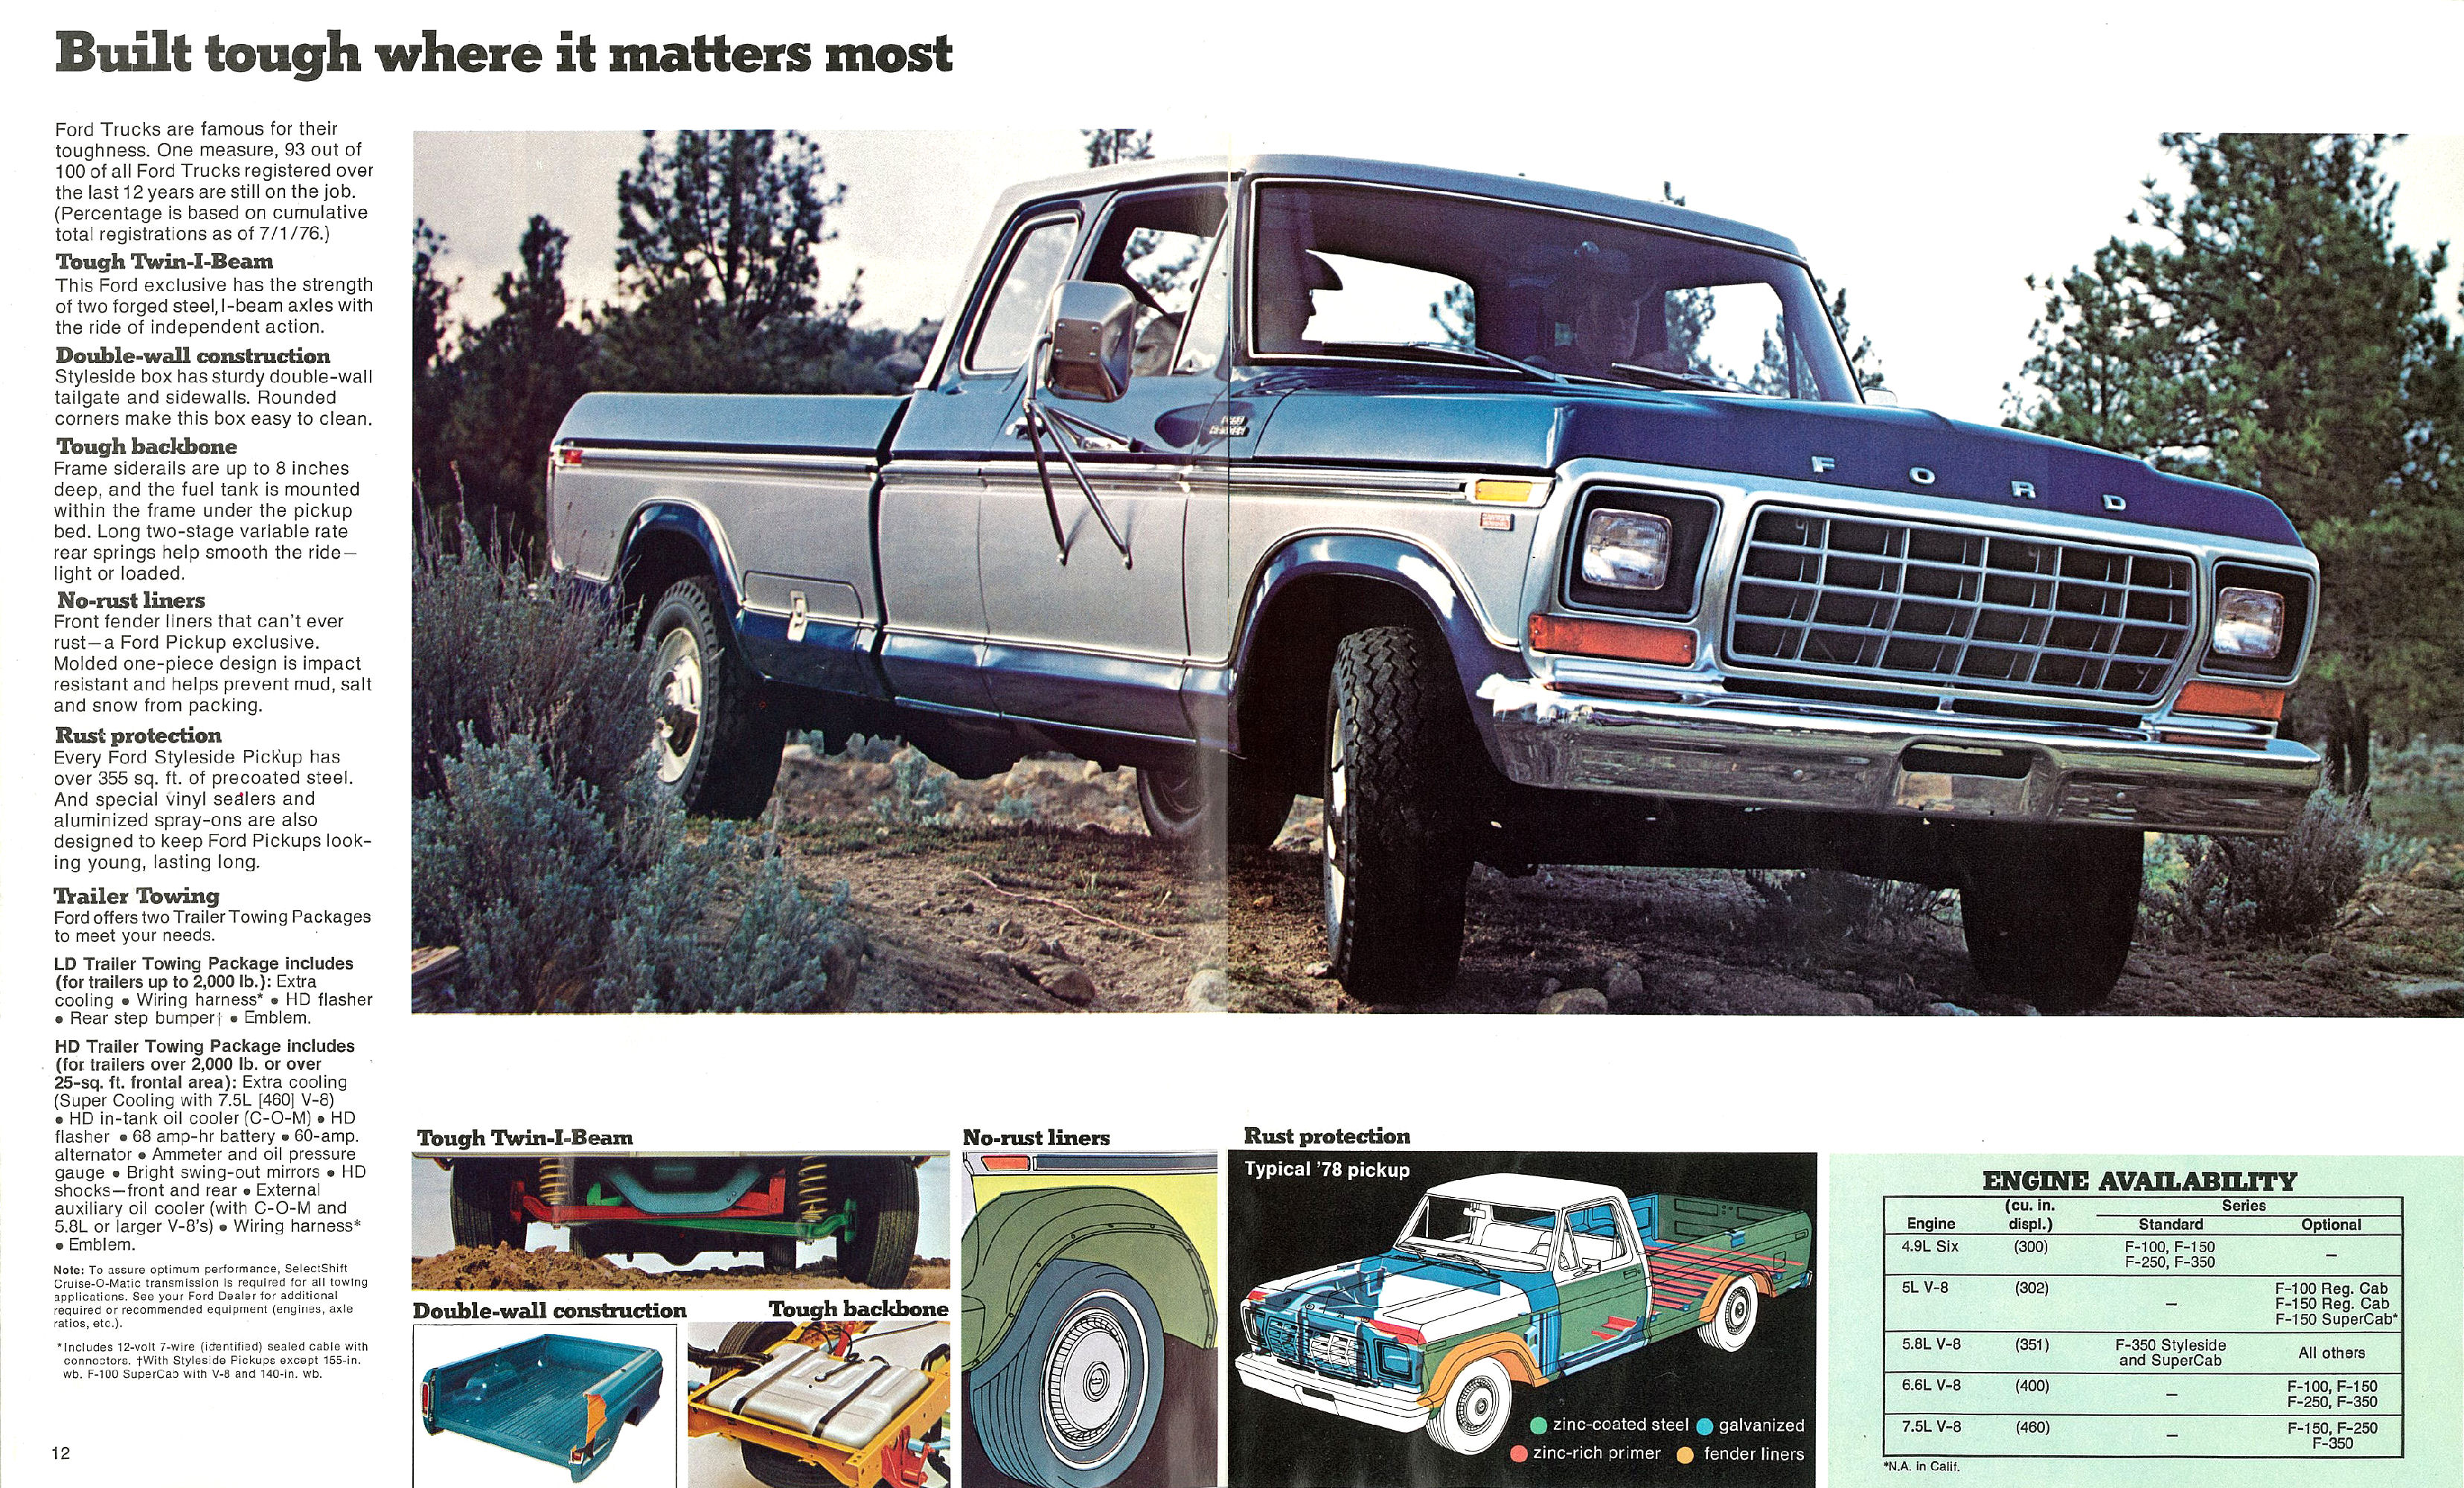 1978 Ford Pickups-12-13